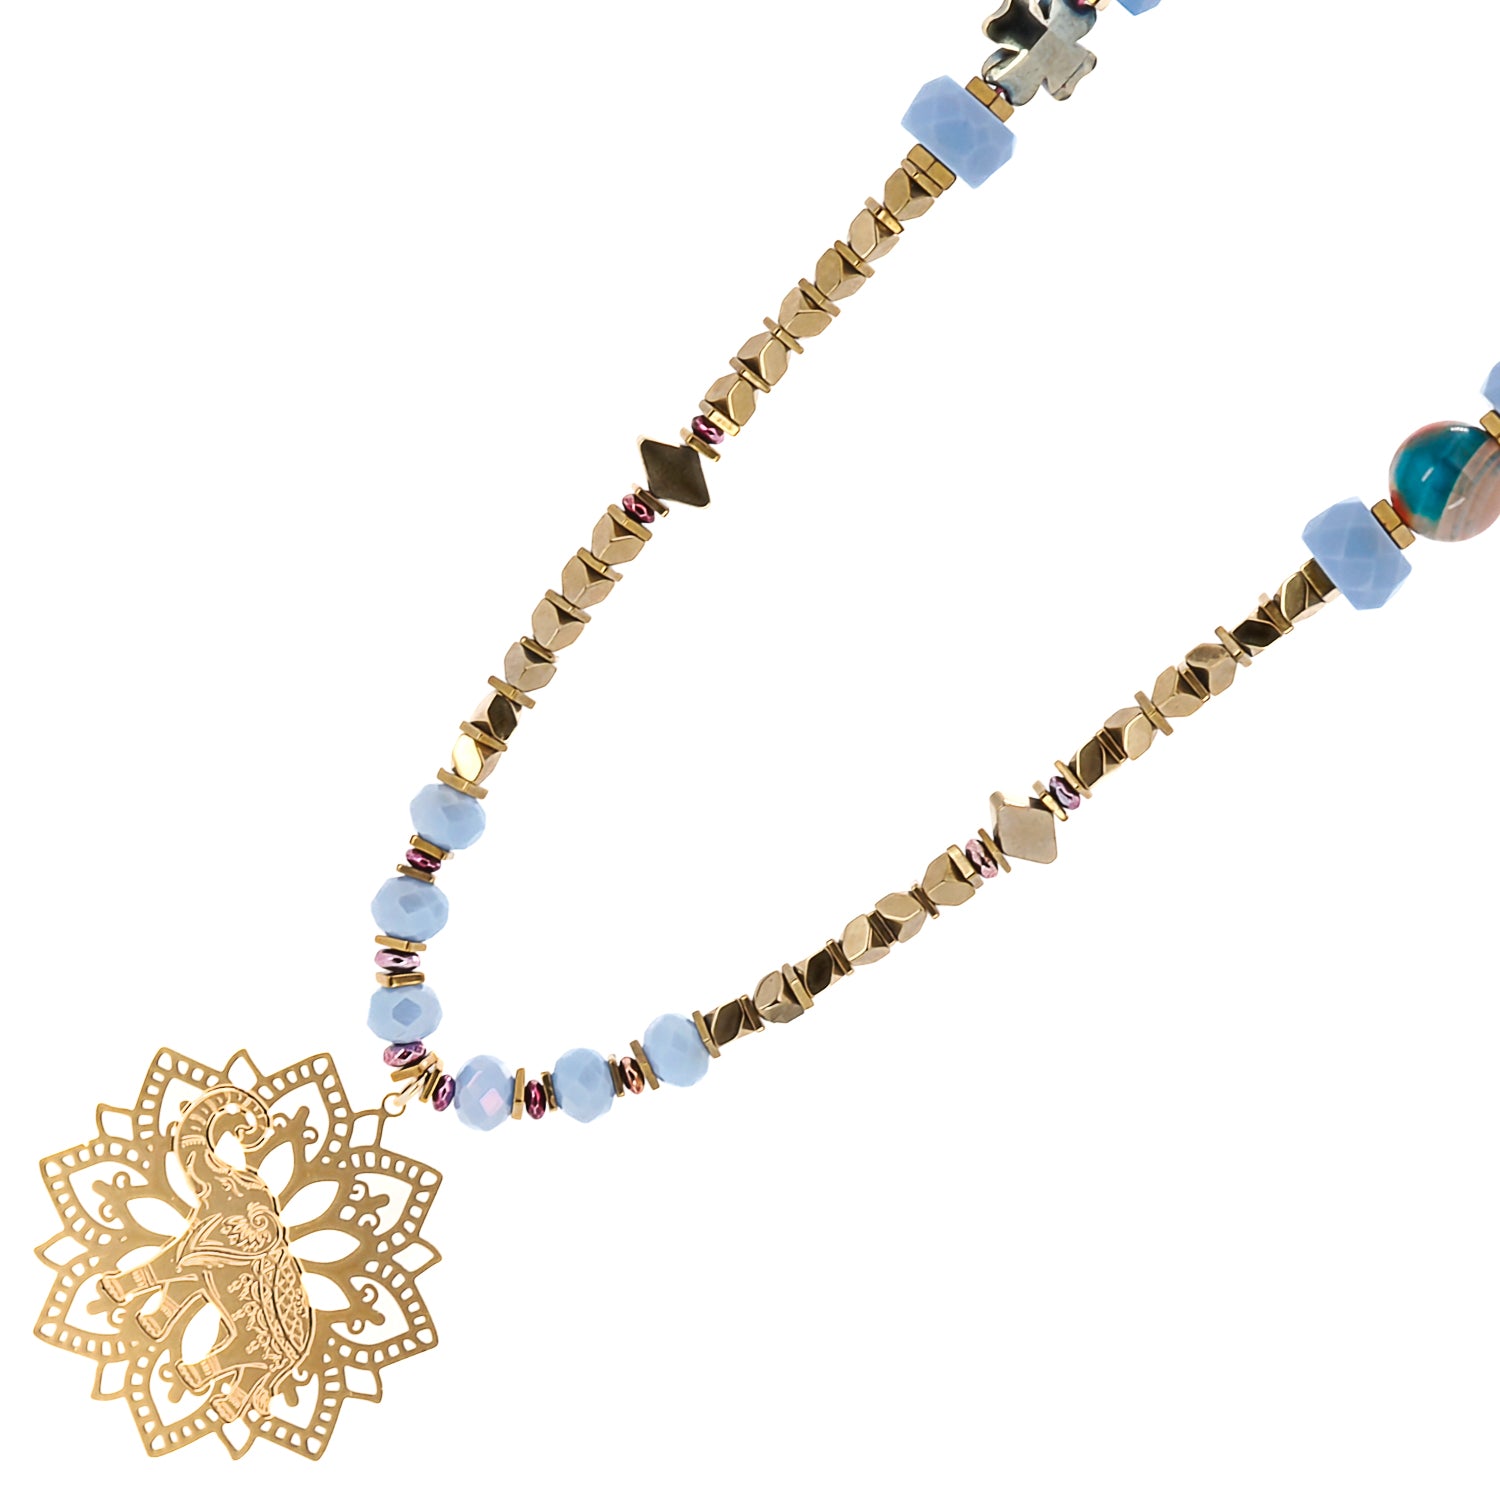 Detailed shot of the faceted blue crystal beads used in the necklace, adding a touch of sparkle and elegance.